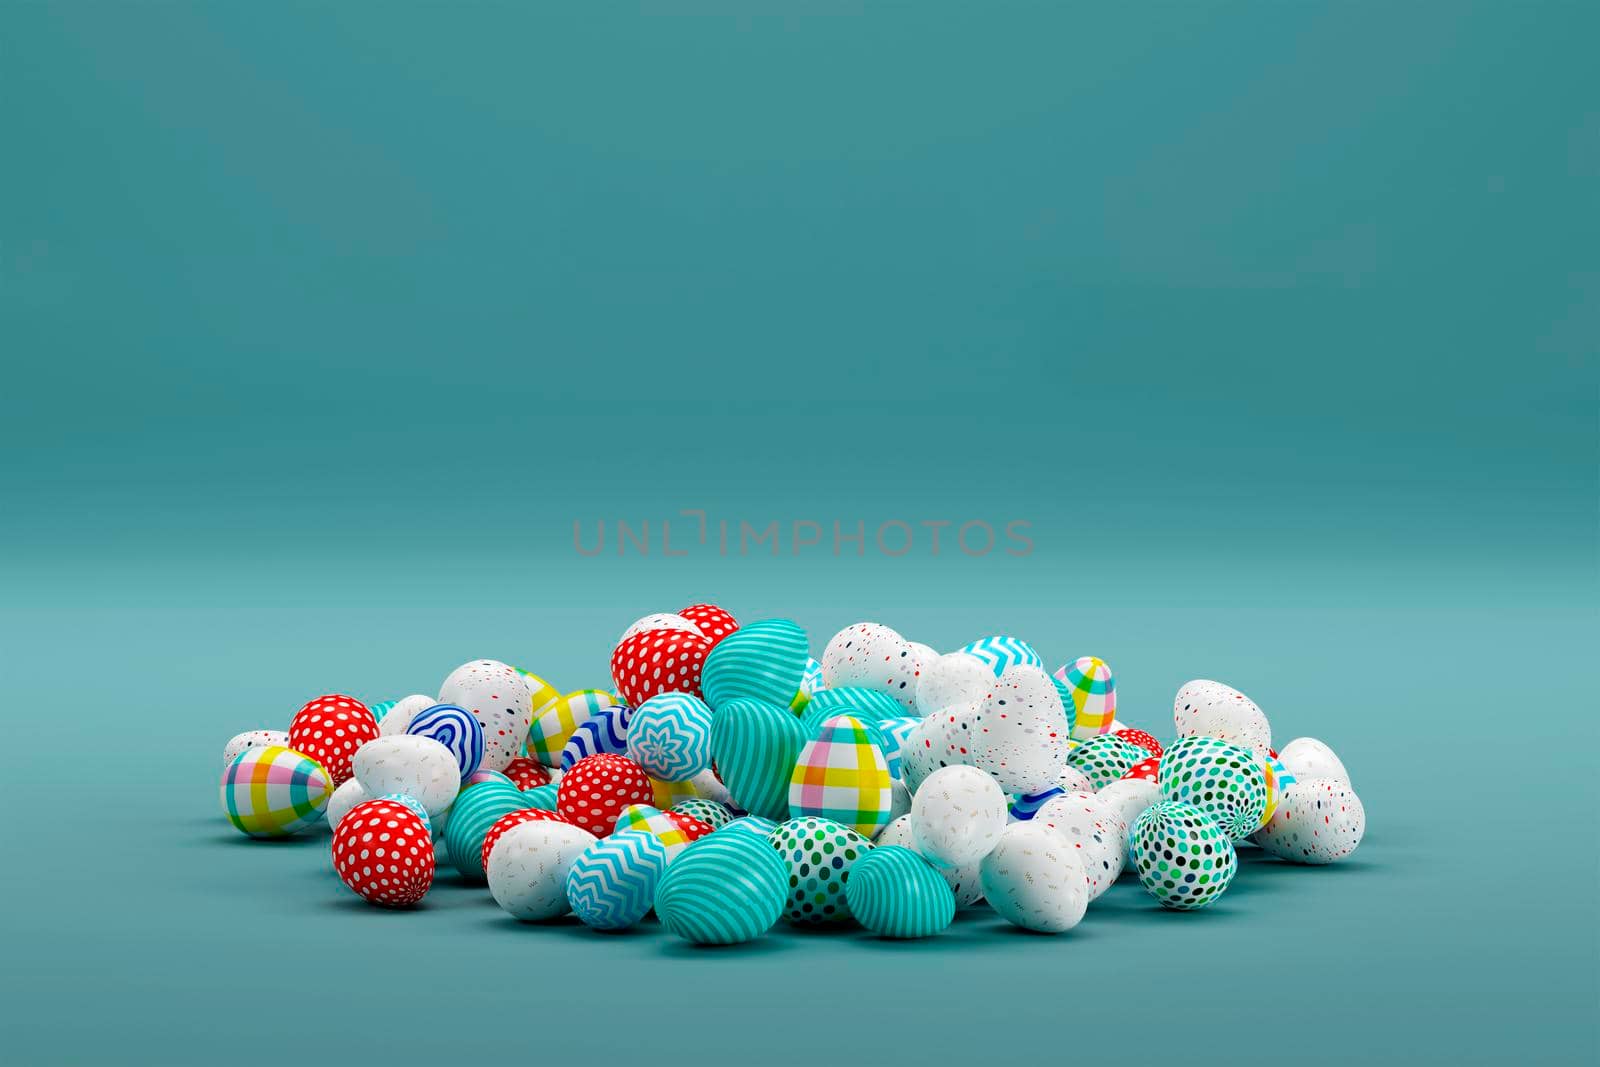 Pile of bright and colorful Easter Eggs - 3d illustration by raferto1973